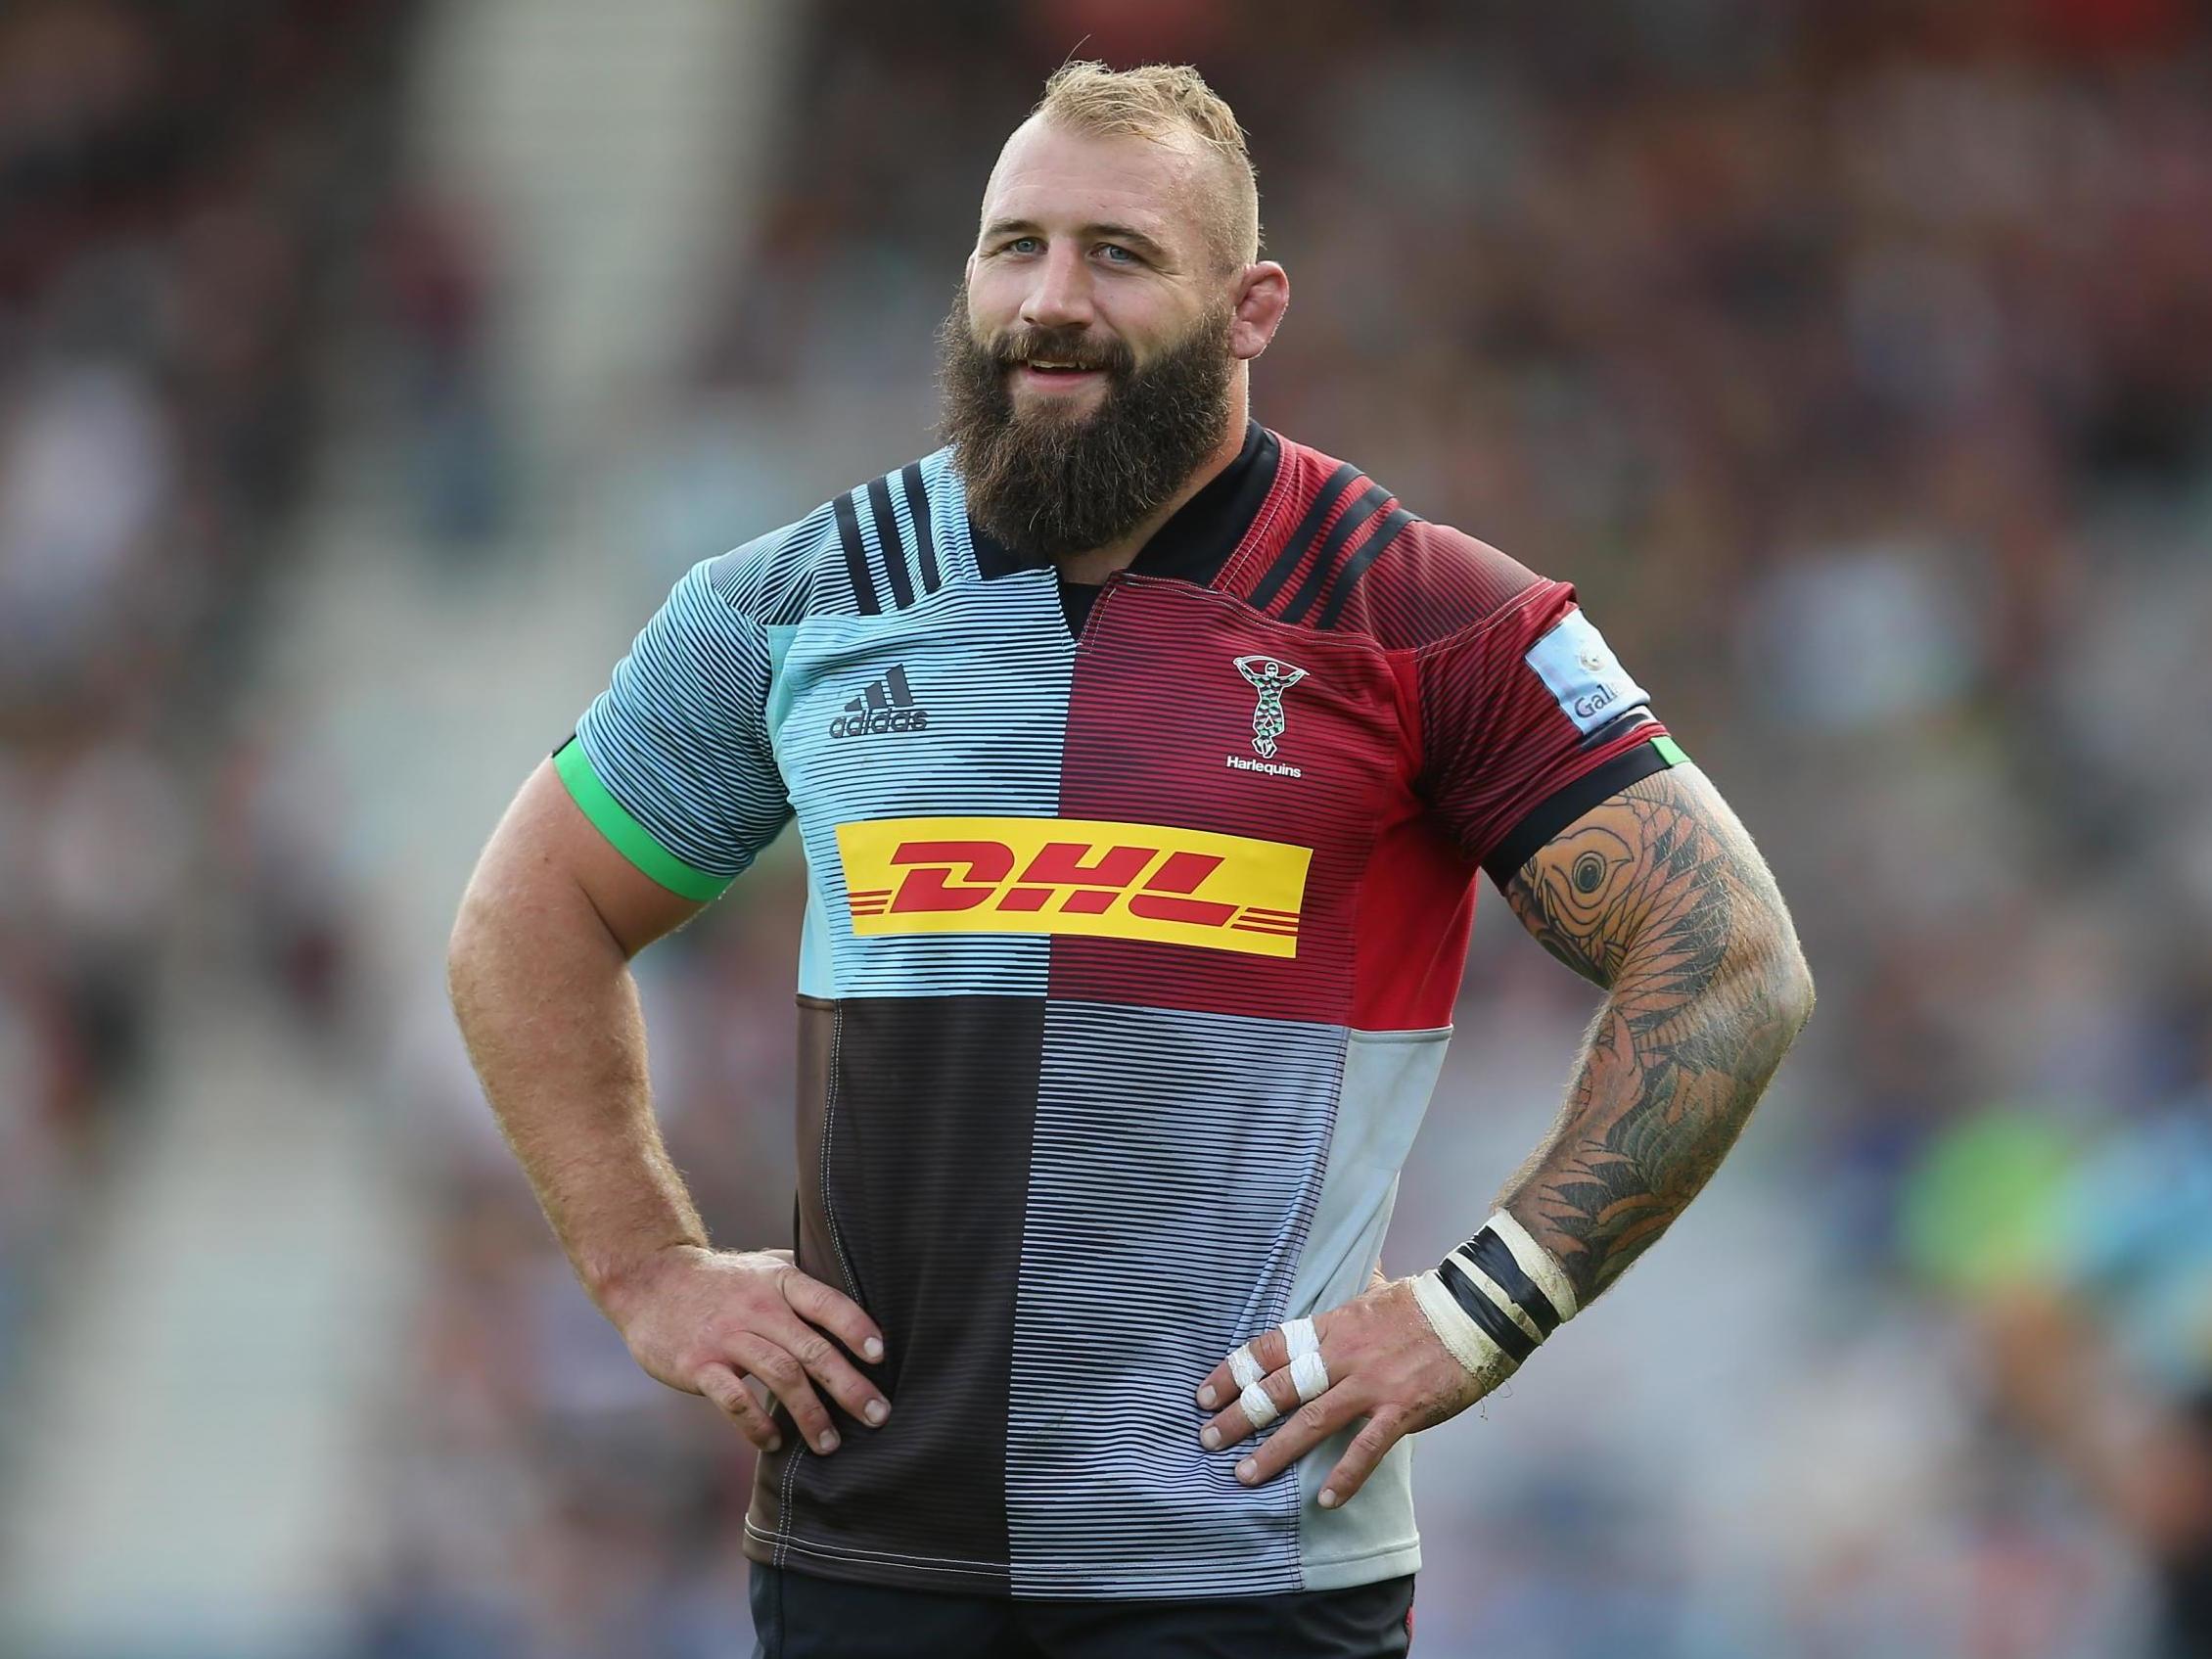 Joe Marler said he would look to get banned before England games